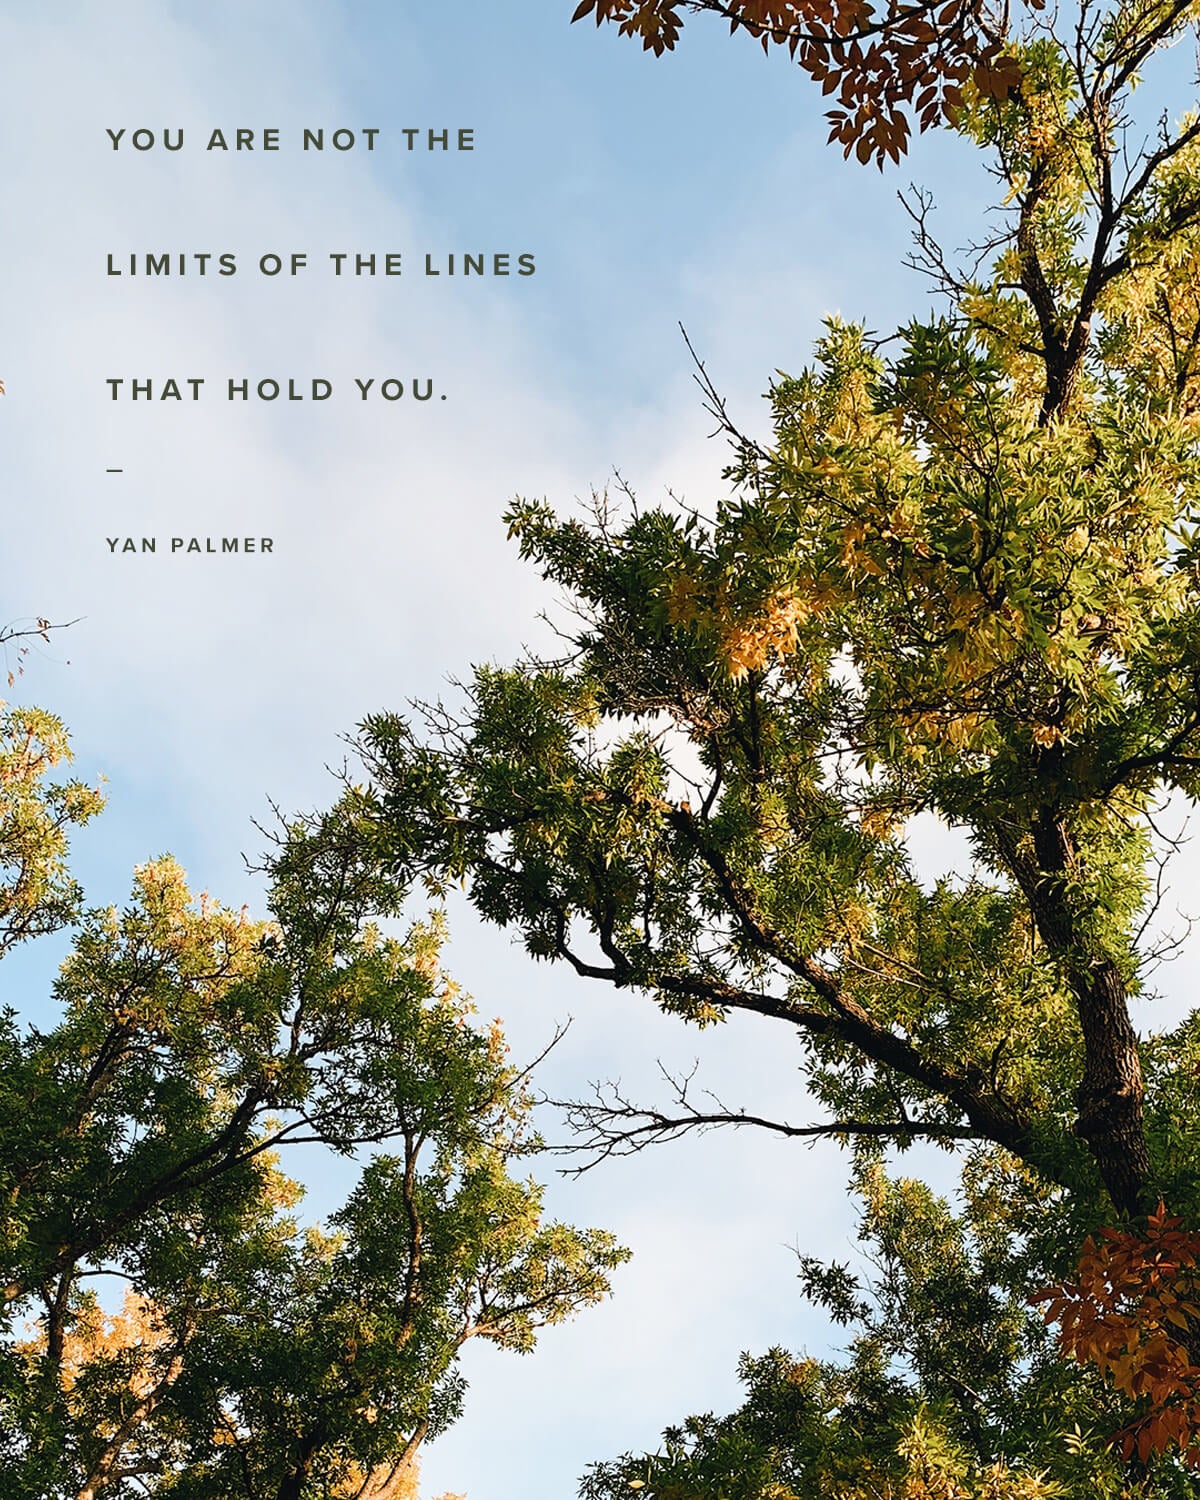 You are not the limits of the lines that hold you